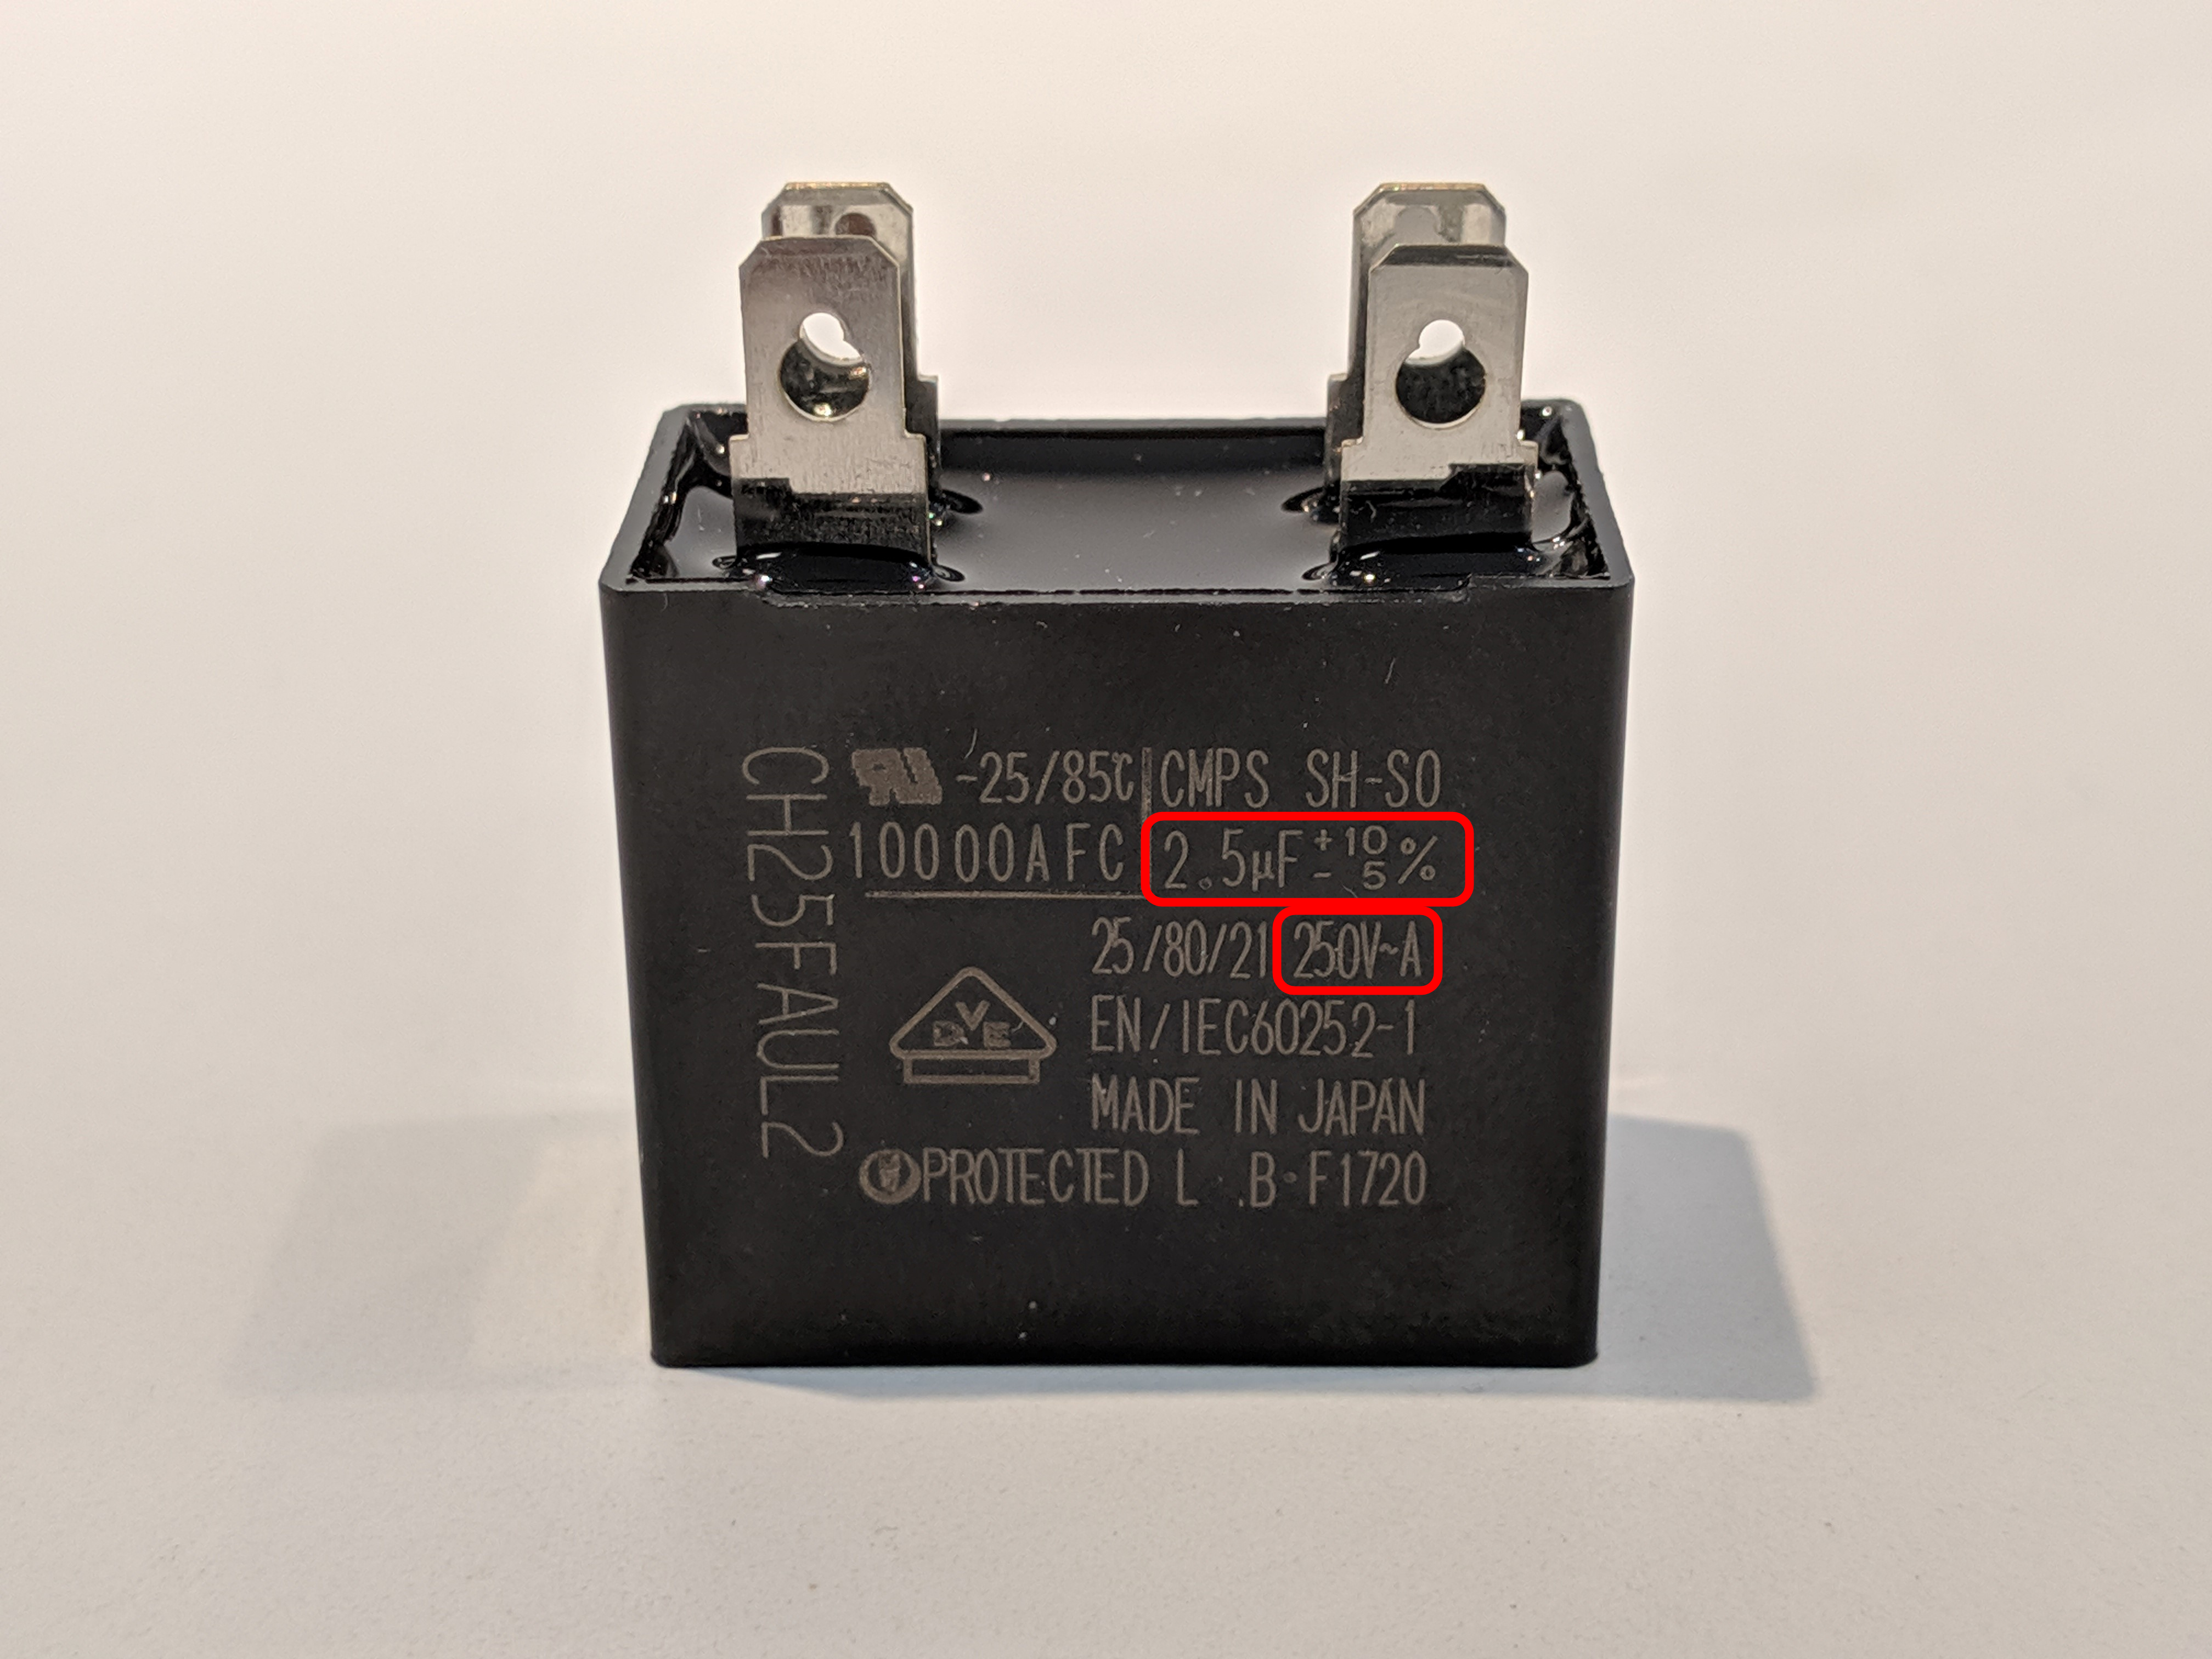 Capacitor label, capacitance and voltage ratings